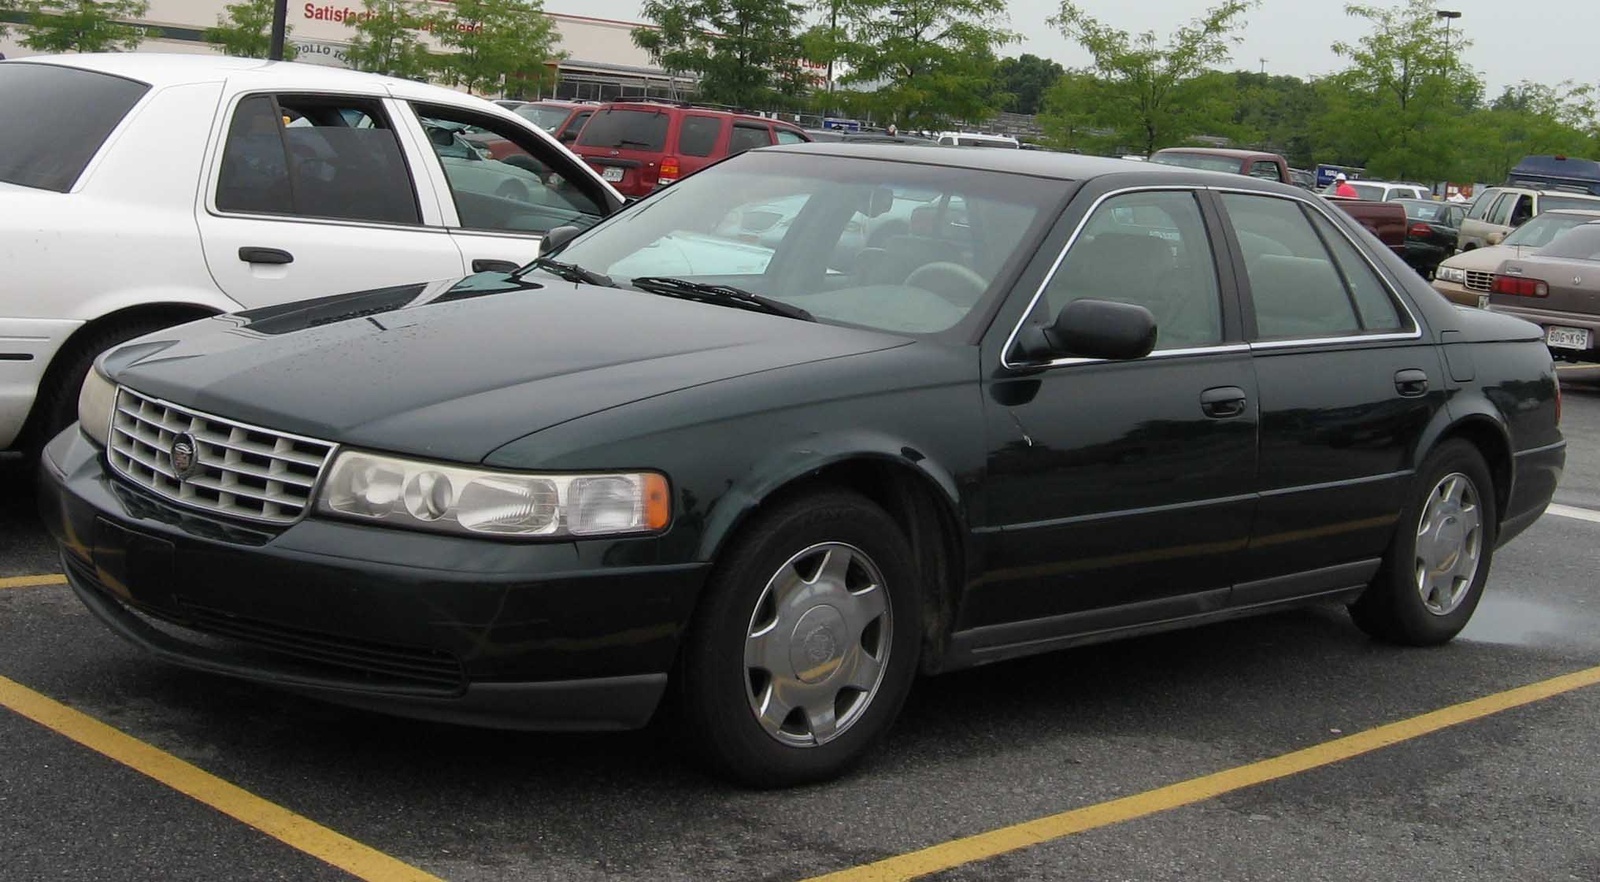 2000 Cadillac DeVille Price, Review & Ratings